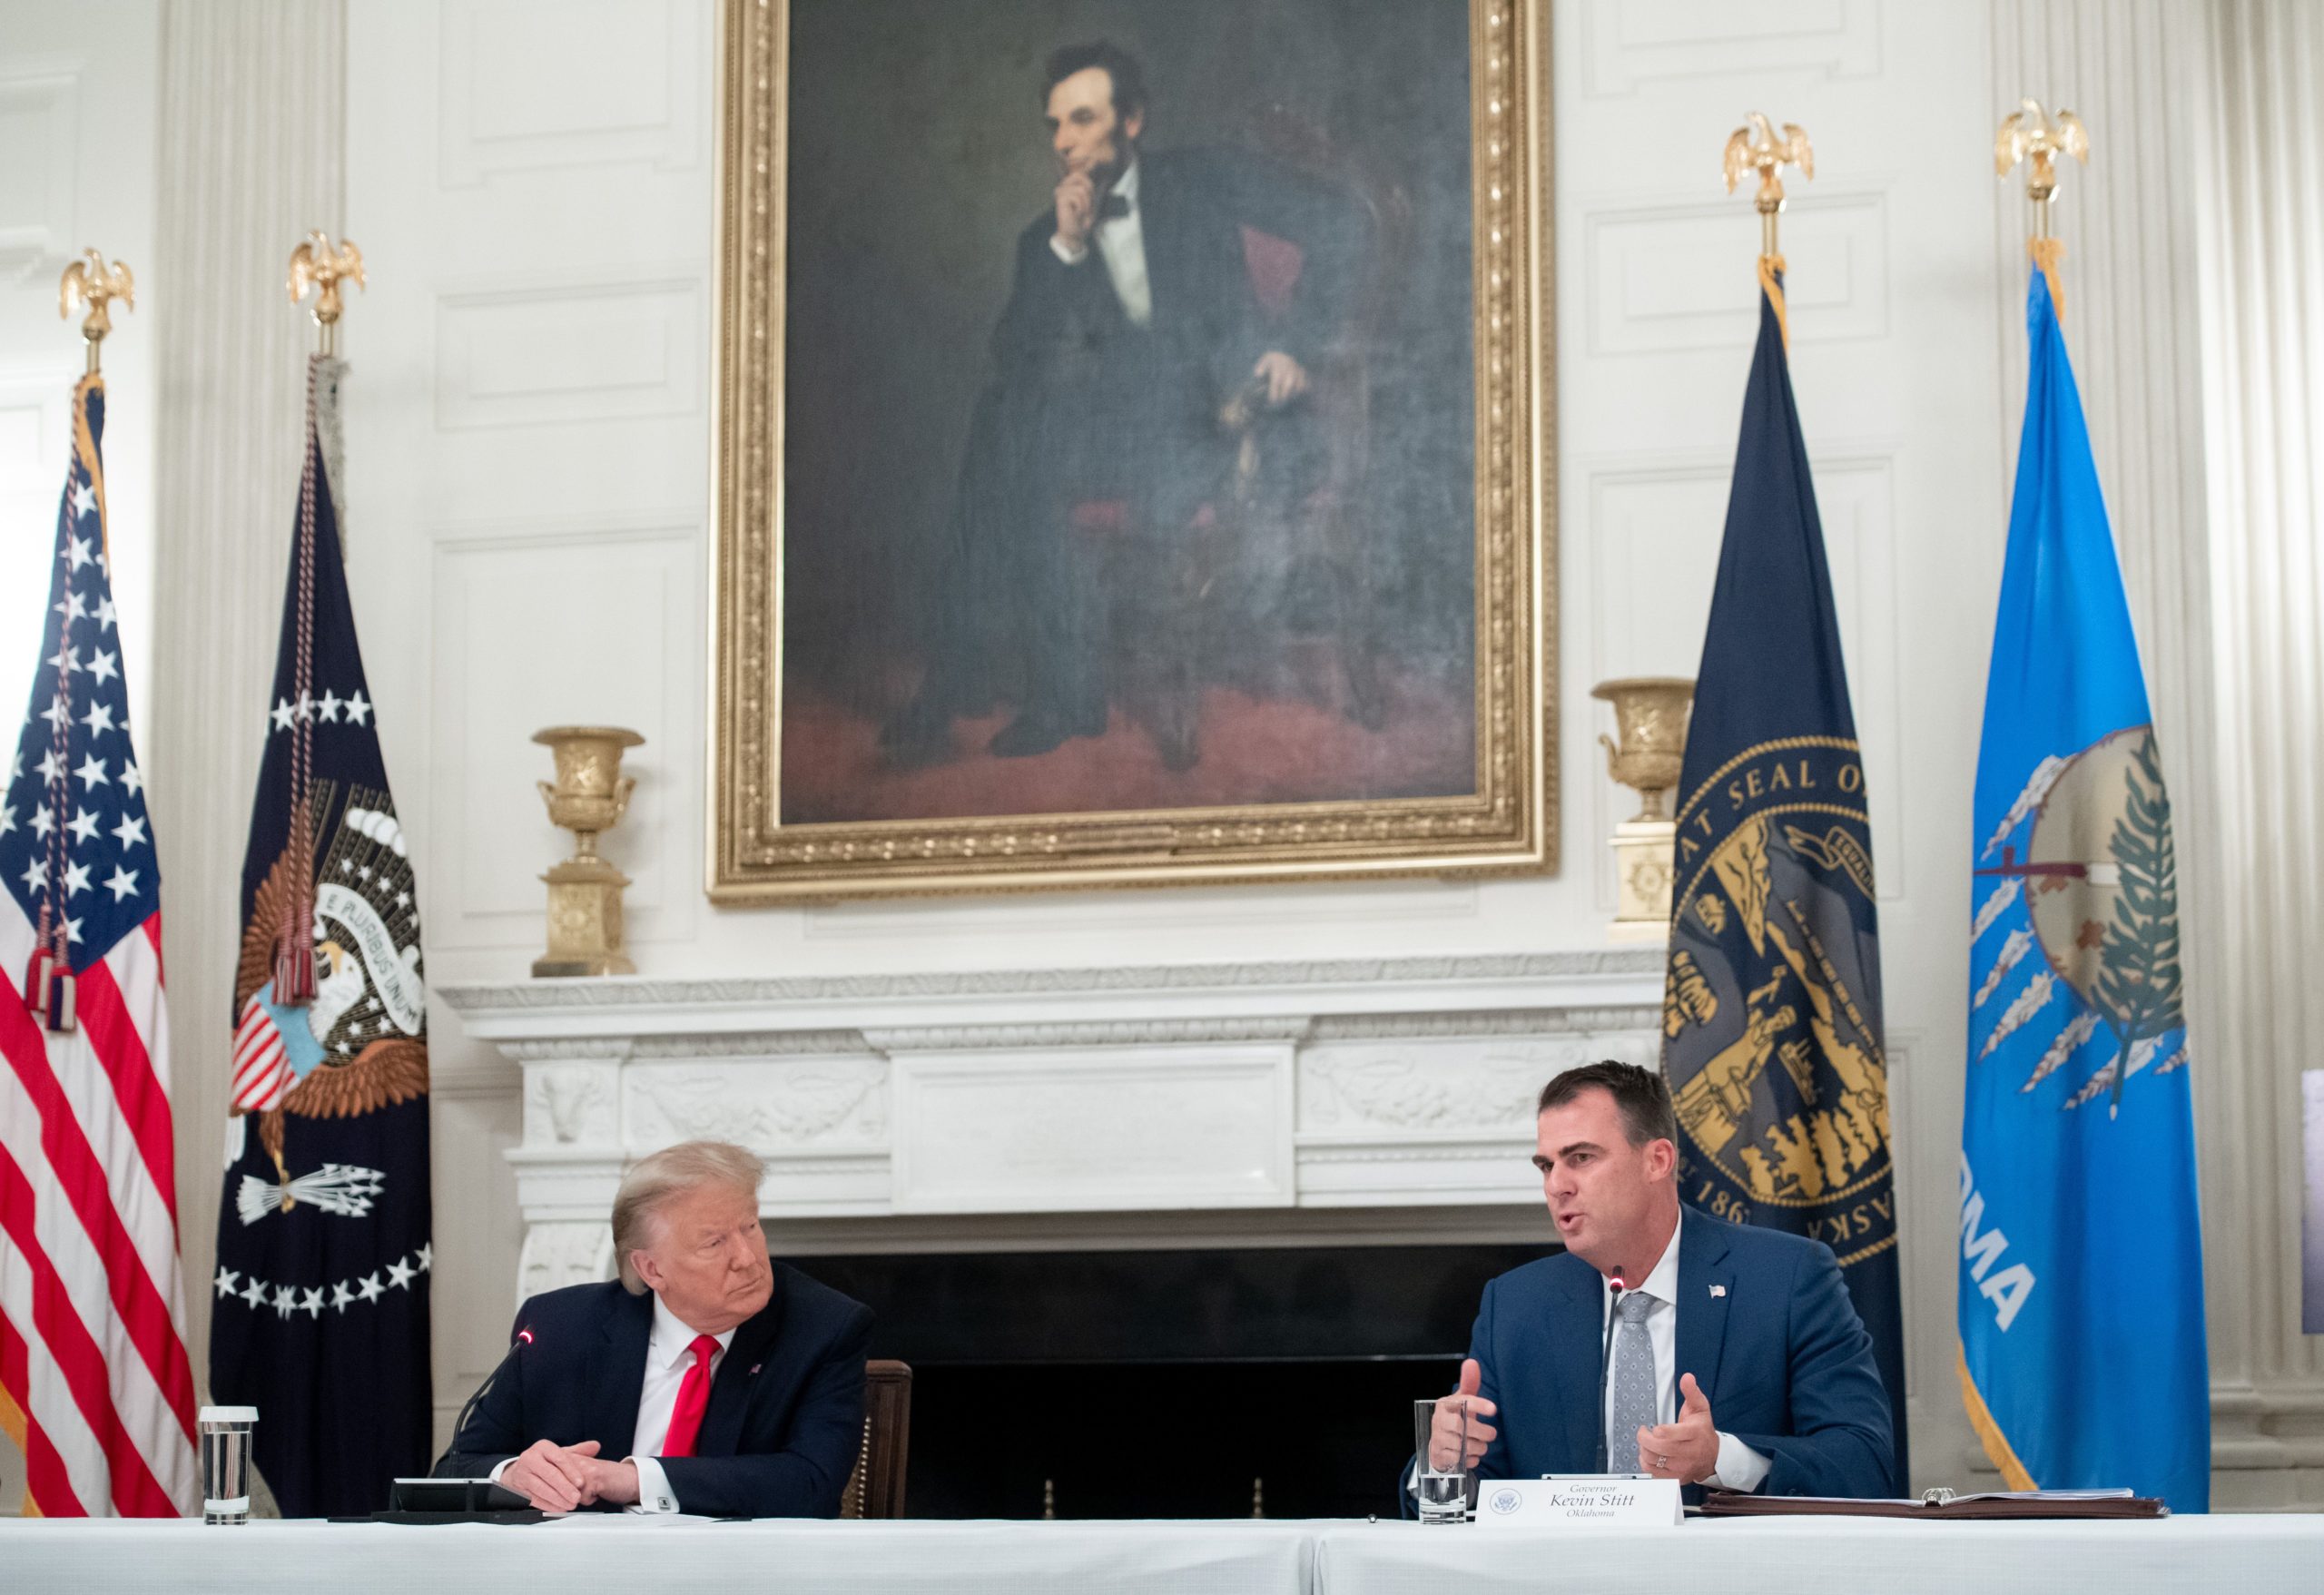 Oklahoma Governor Kevin Stitt speaks alongside US President Donald Trump (L) as he holds a roundtable discussion with Governors about economic reopening of closures due to COVID-19, known as coronavirus, in the State Dining Room of the White House in Washington, DC, June 18, 2020. (Photo by SAUL LOEB / AFP) (Photo by SAUL LOEB/AFP via Getty Images)